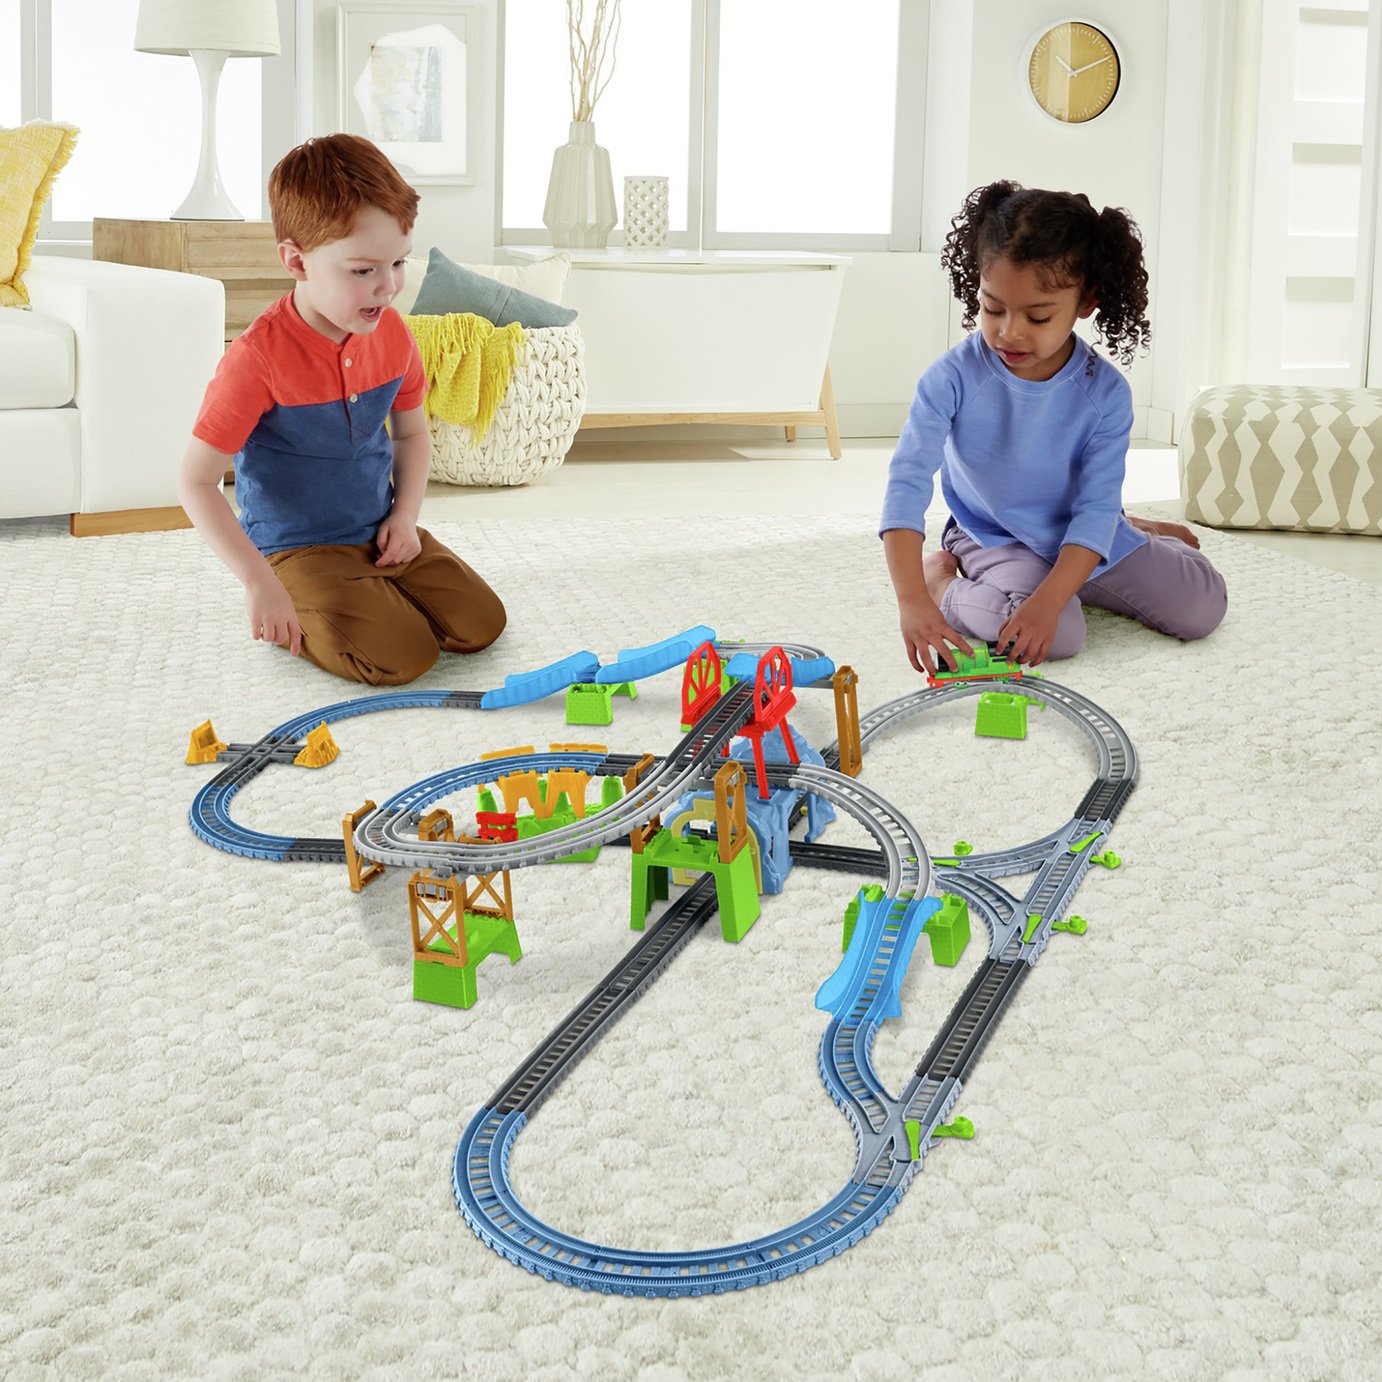 Thomas & Friends TrackMaster Percy 6-in-1 Track Set review